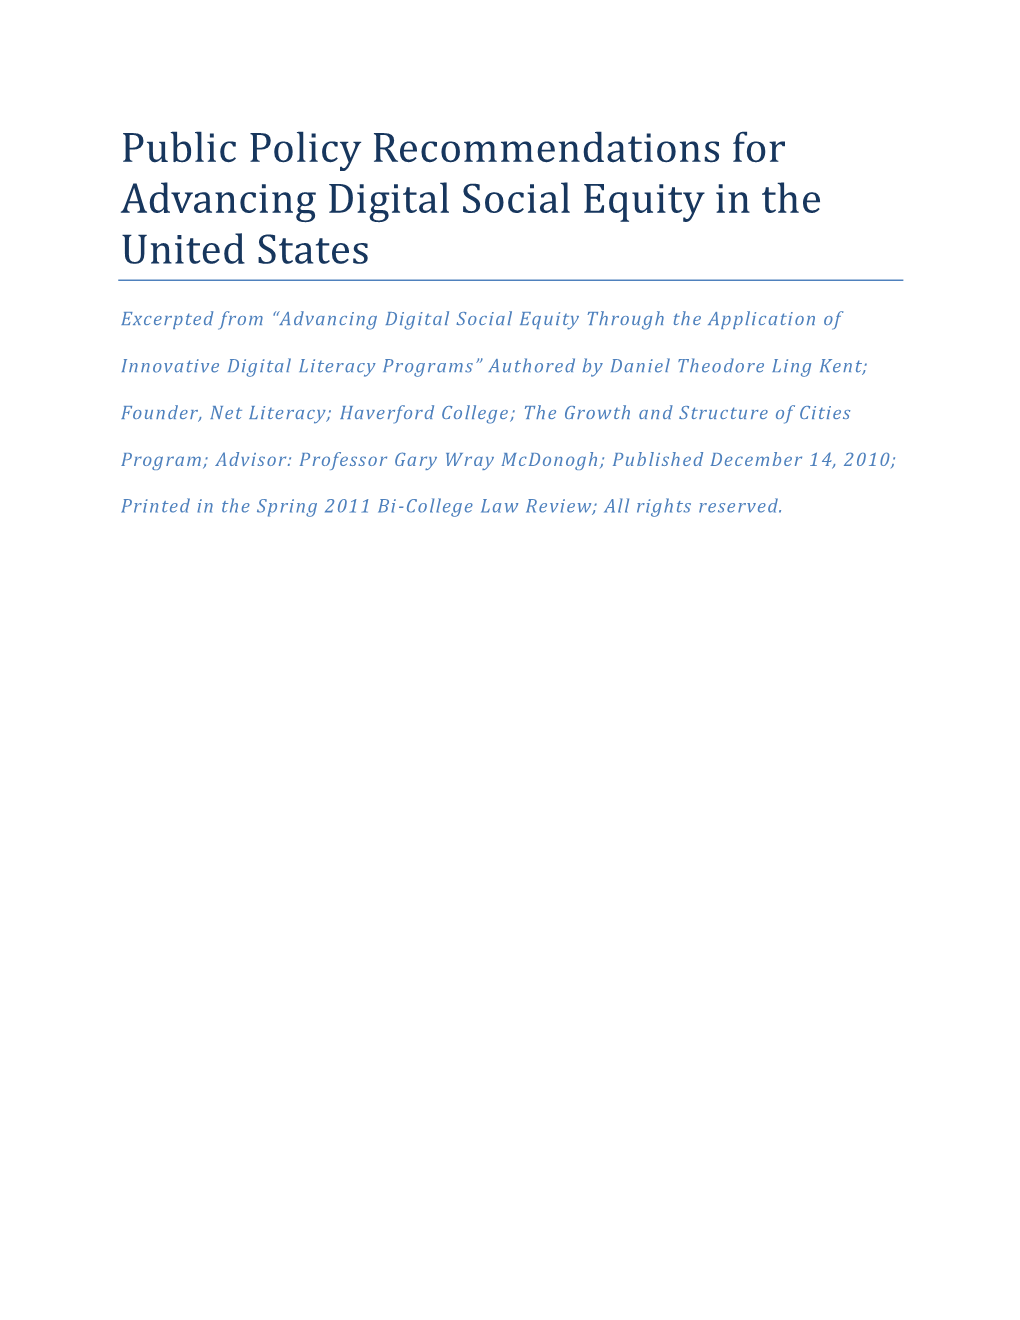 Advancing Digital Social Equity Through the Application Of